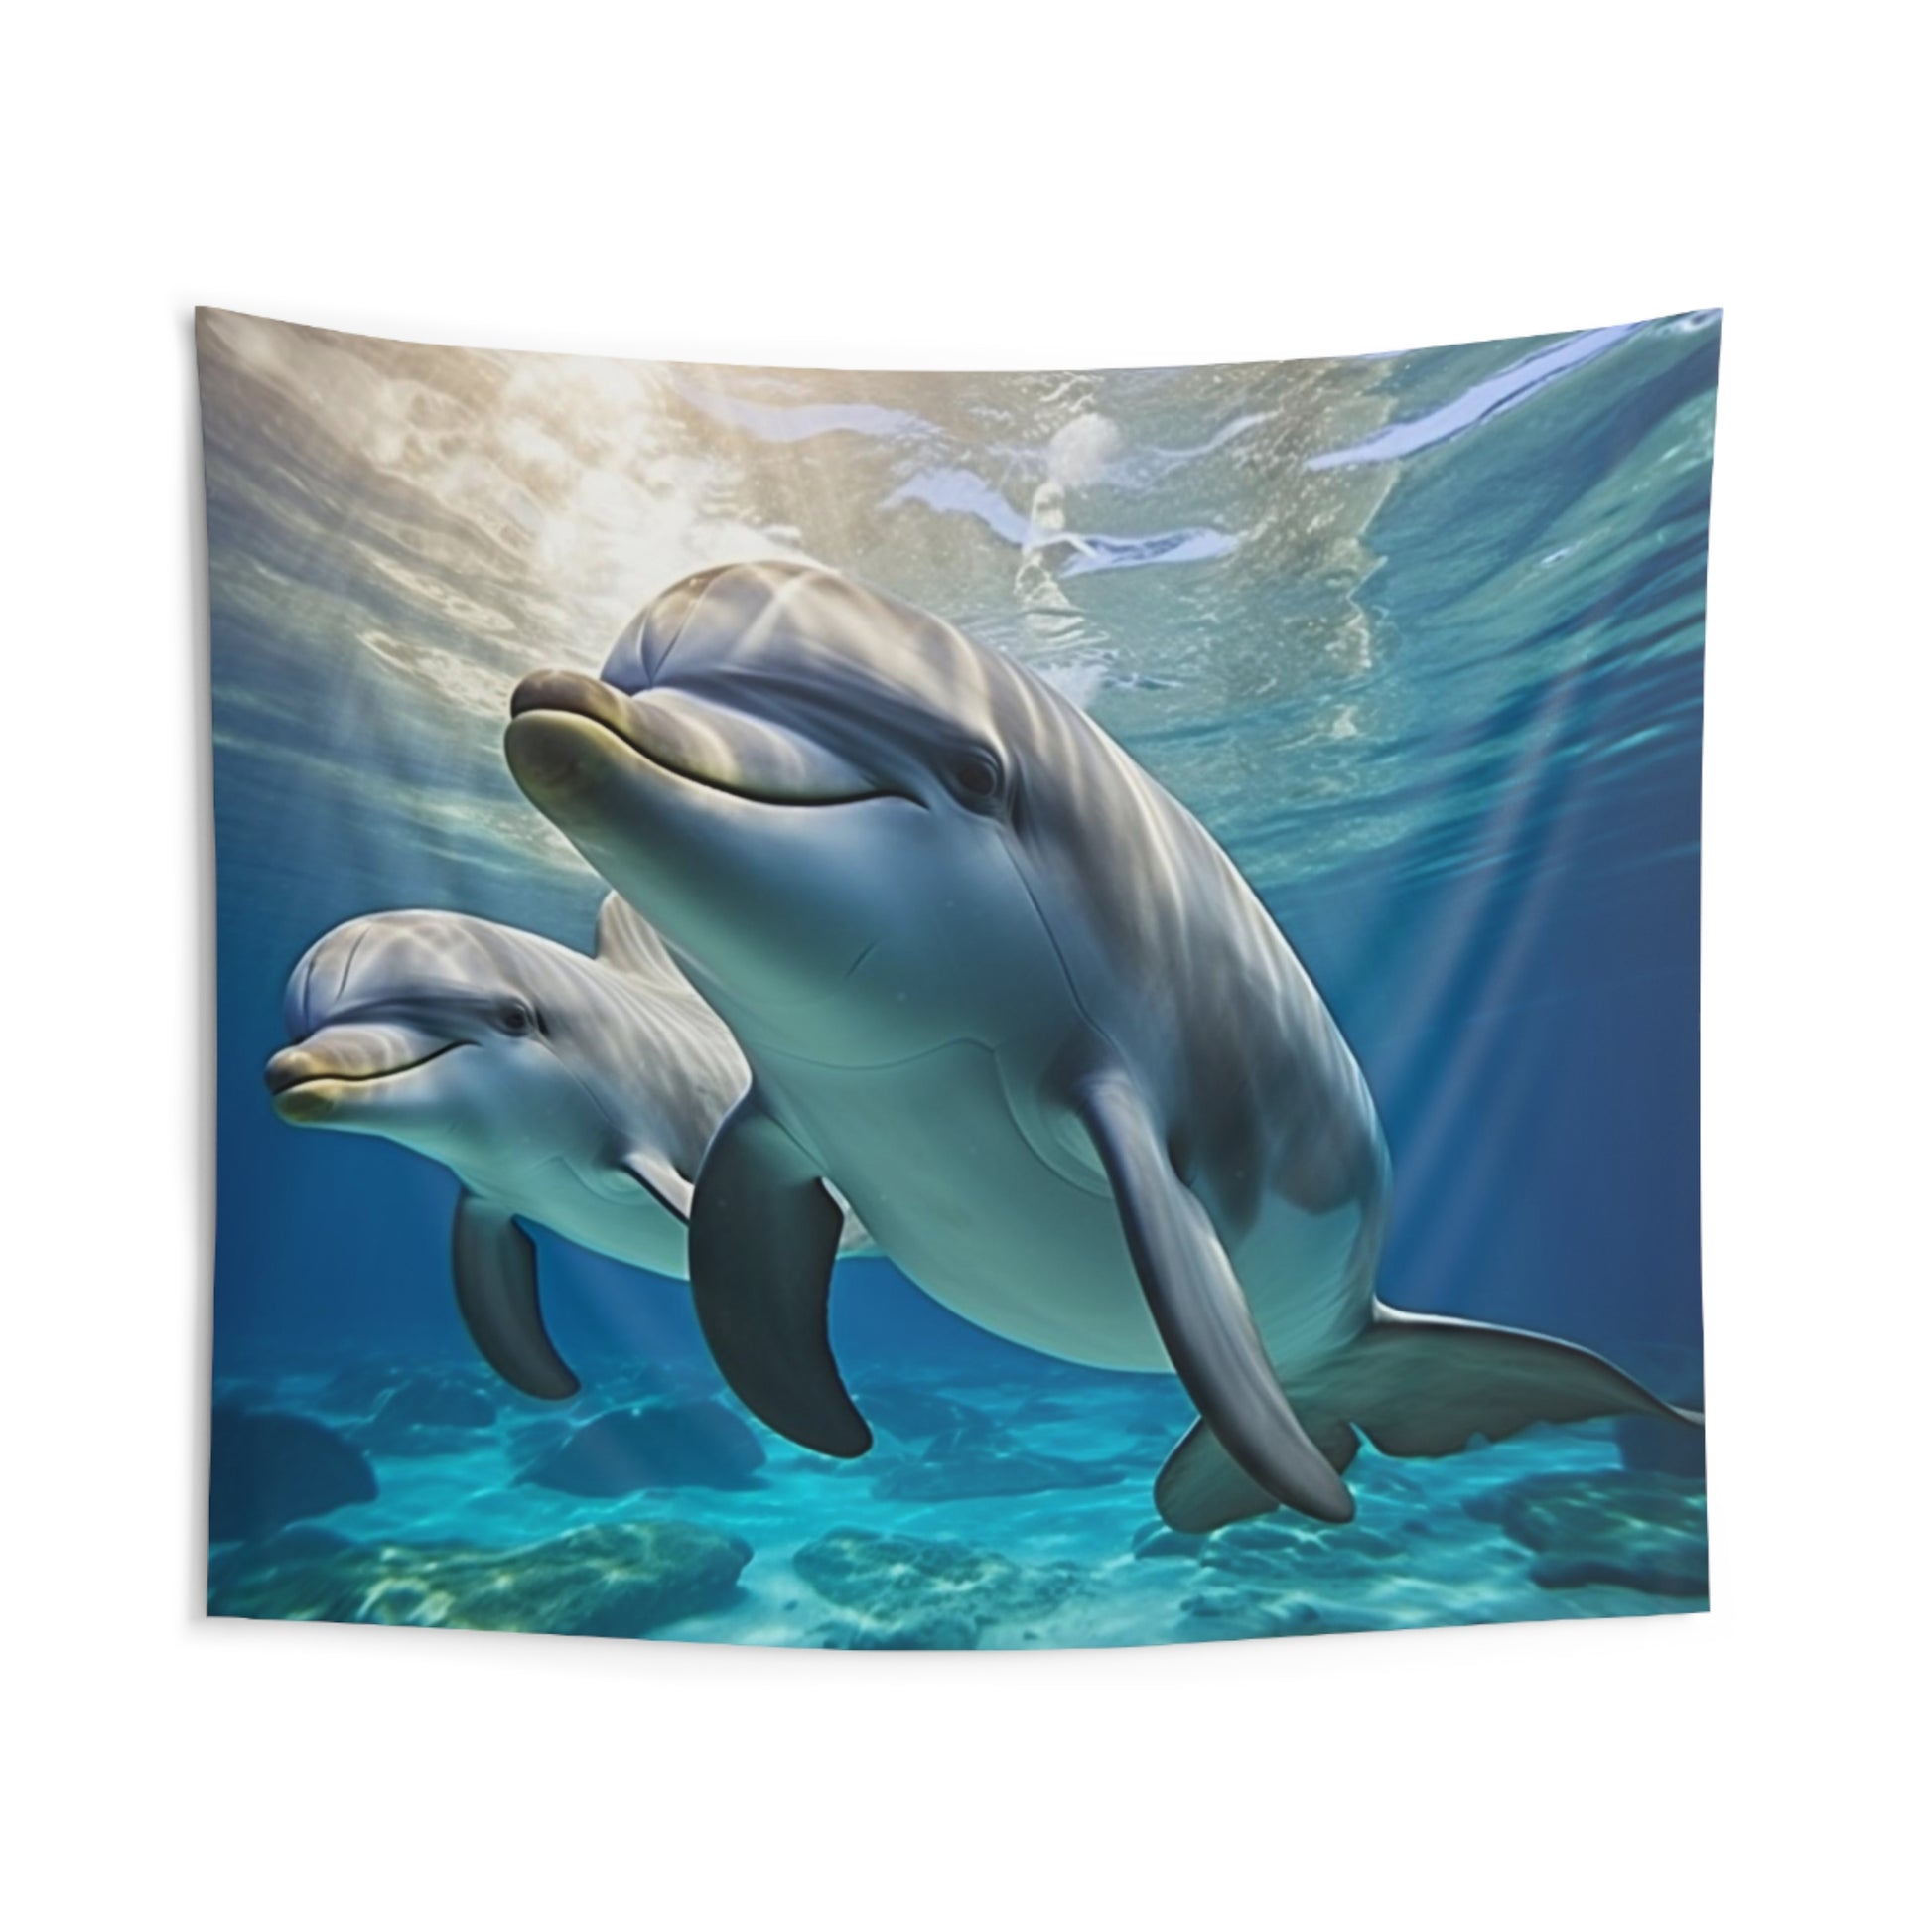 Dolphins Tapestry, Sea Ocean Underwater Wall Art Hanging Cool Unique Landscape Aesthetic Large Small Decor Bedroom College Dorm Room Starcove Fashion